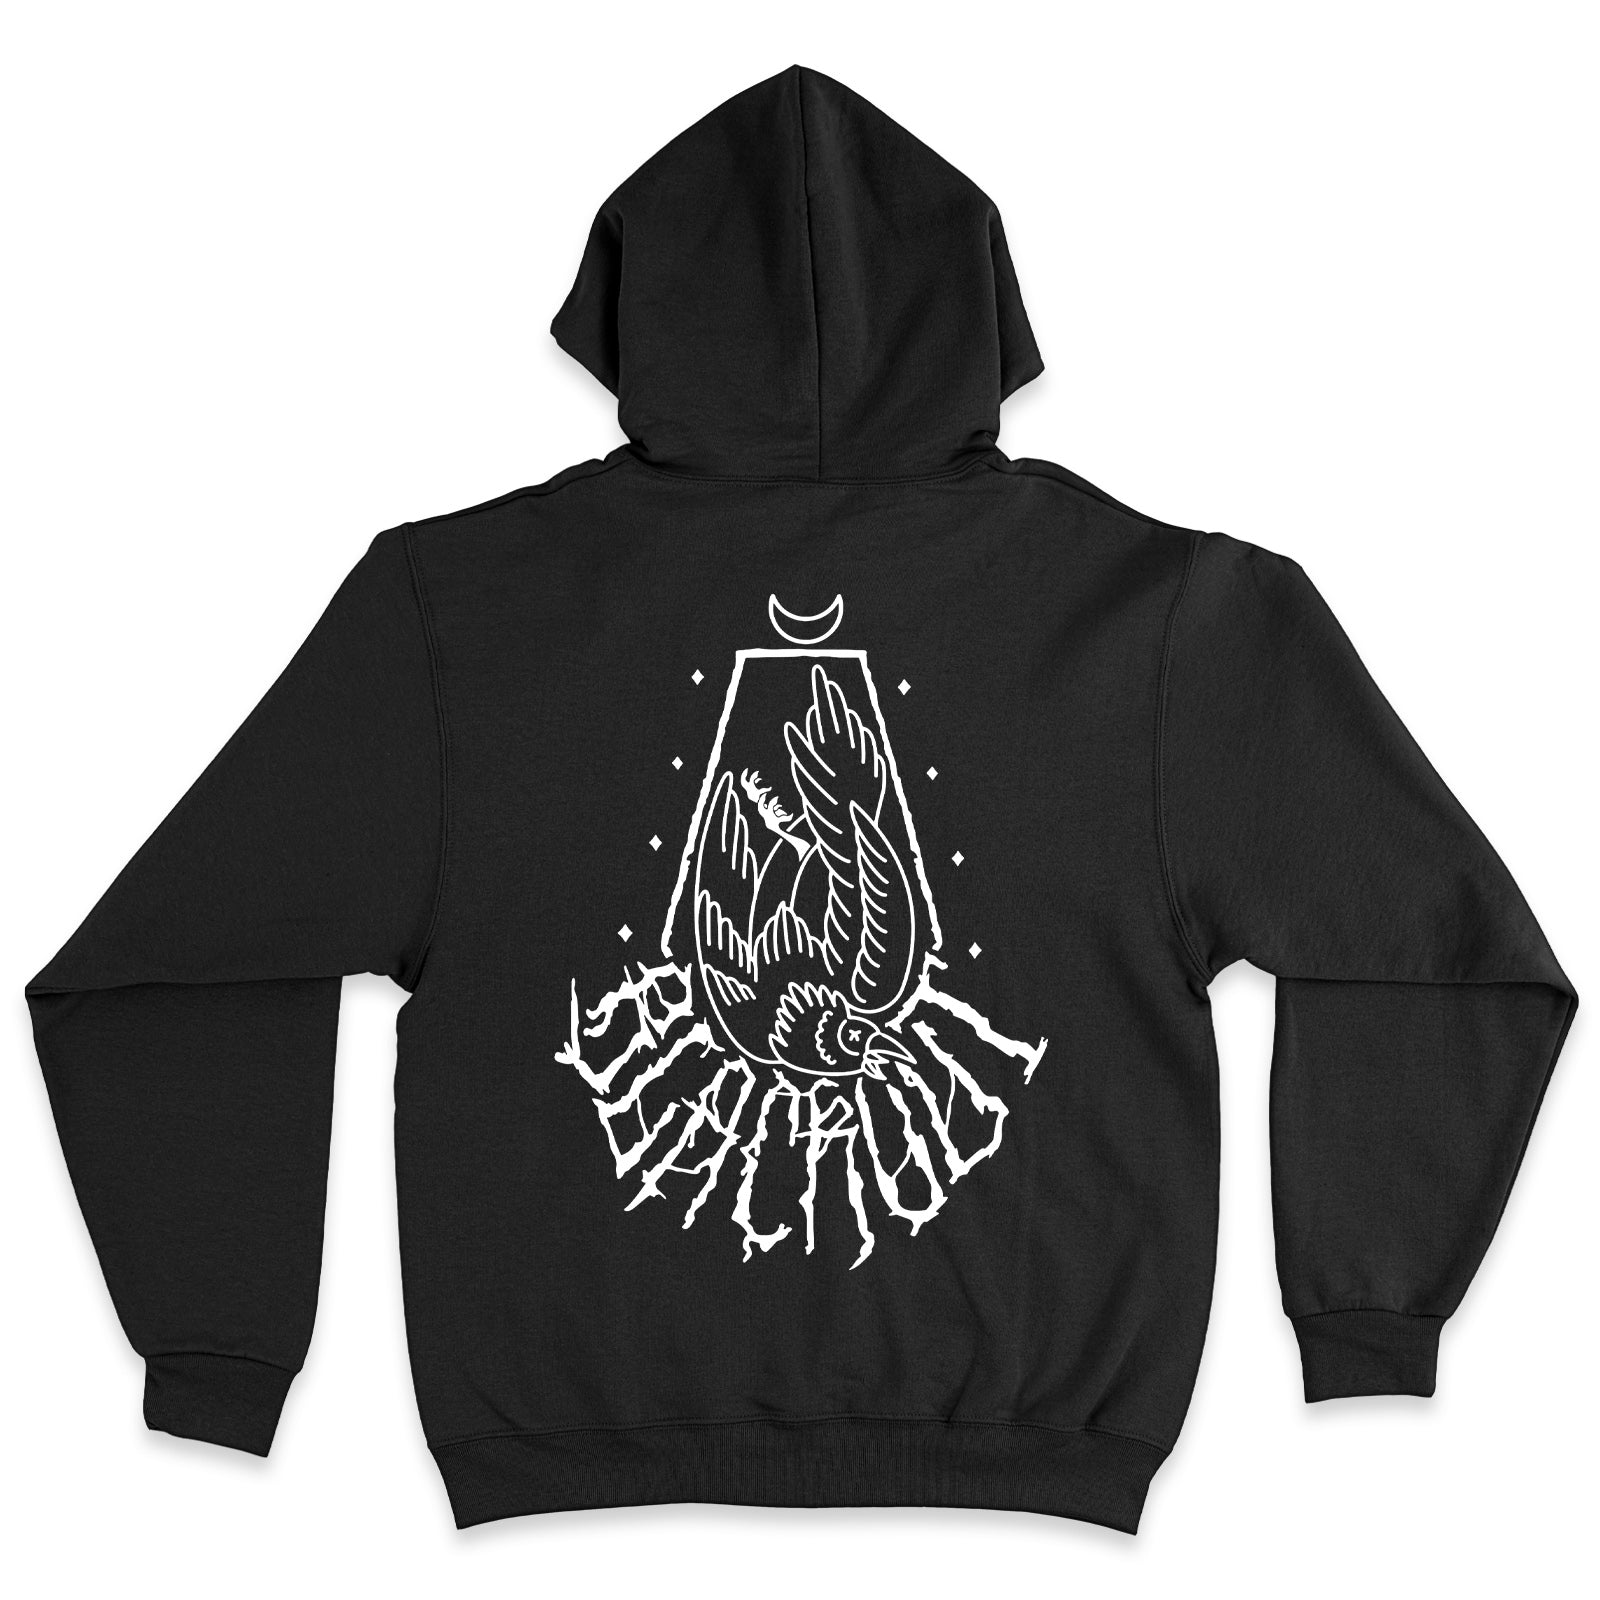 Blackout Pullover Hoodie